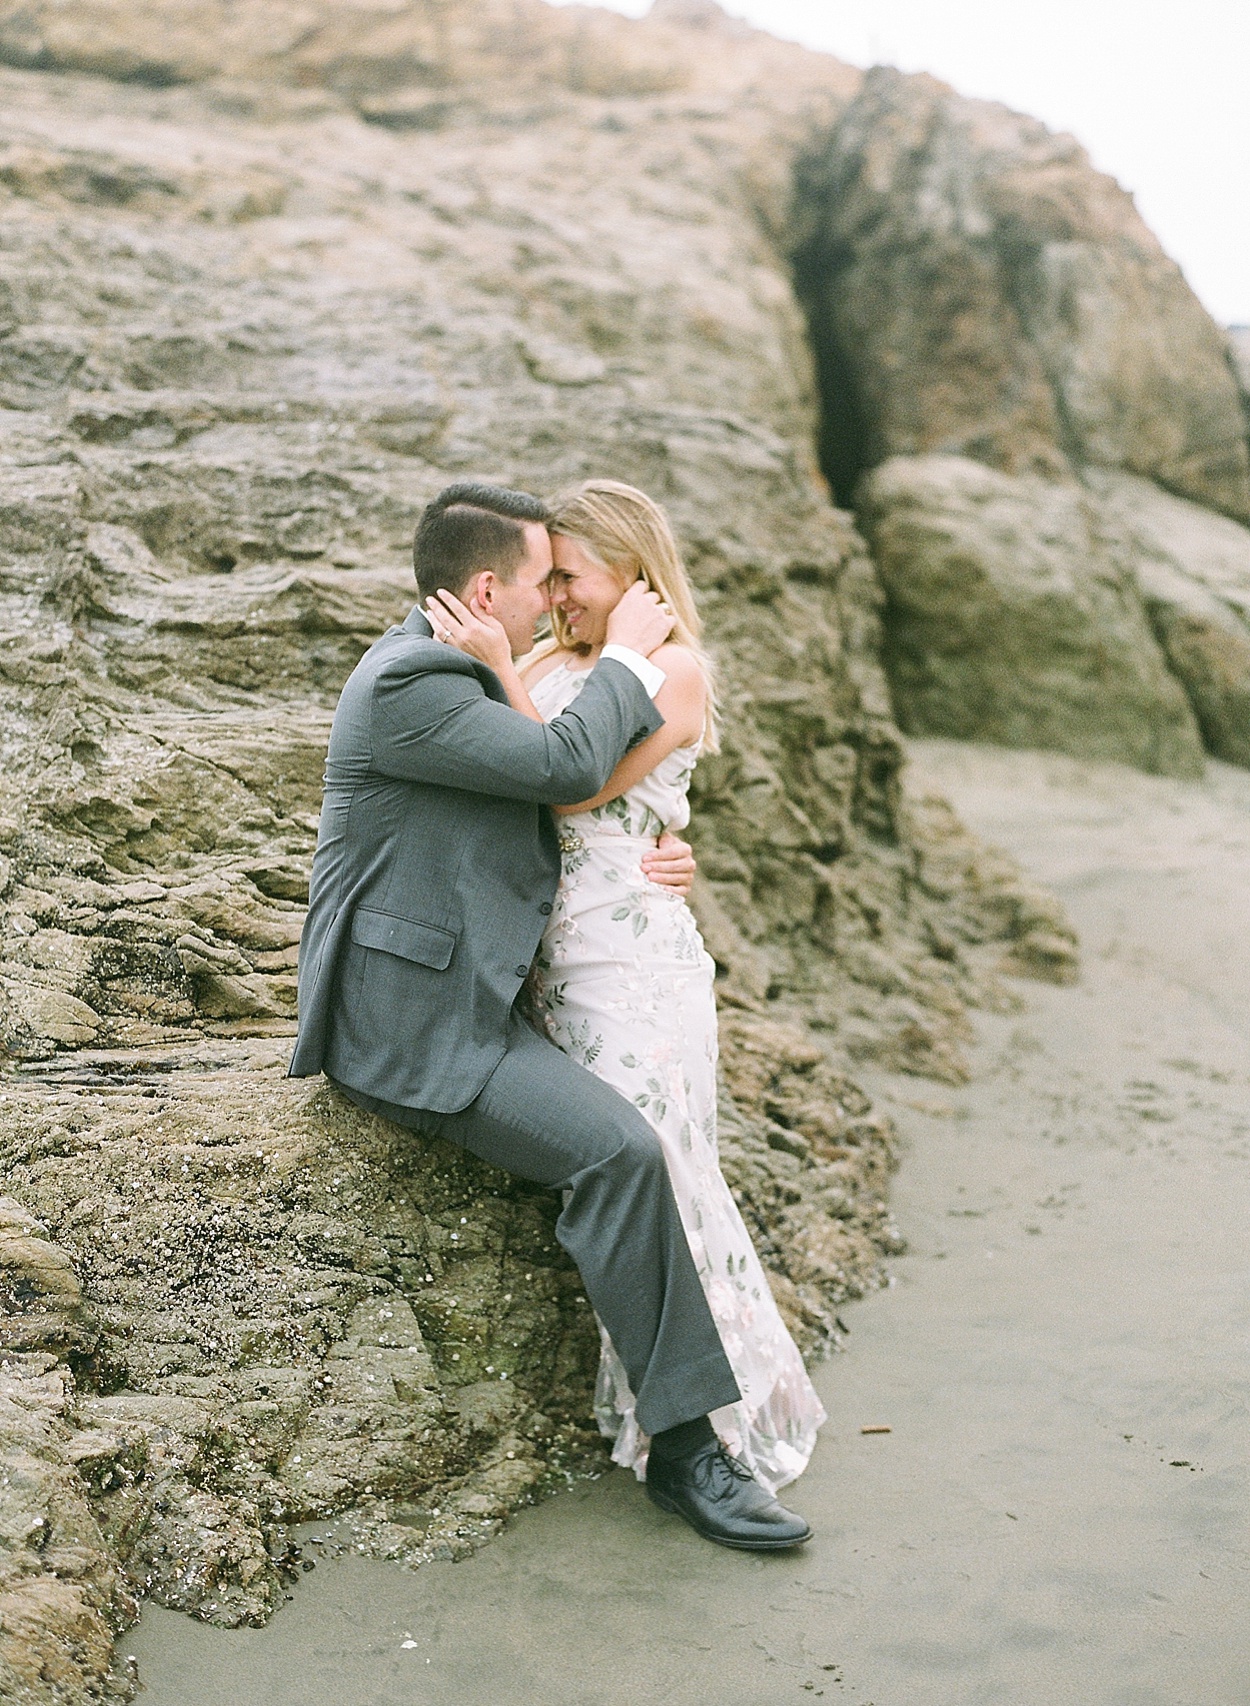 San Francisco engagement portraits at the Sutro Baths by Abby Grace